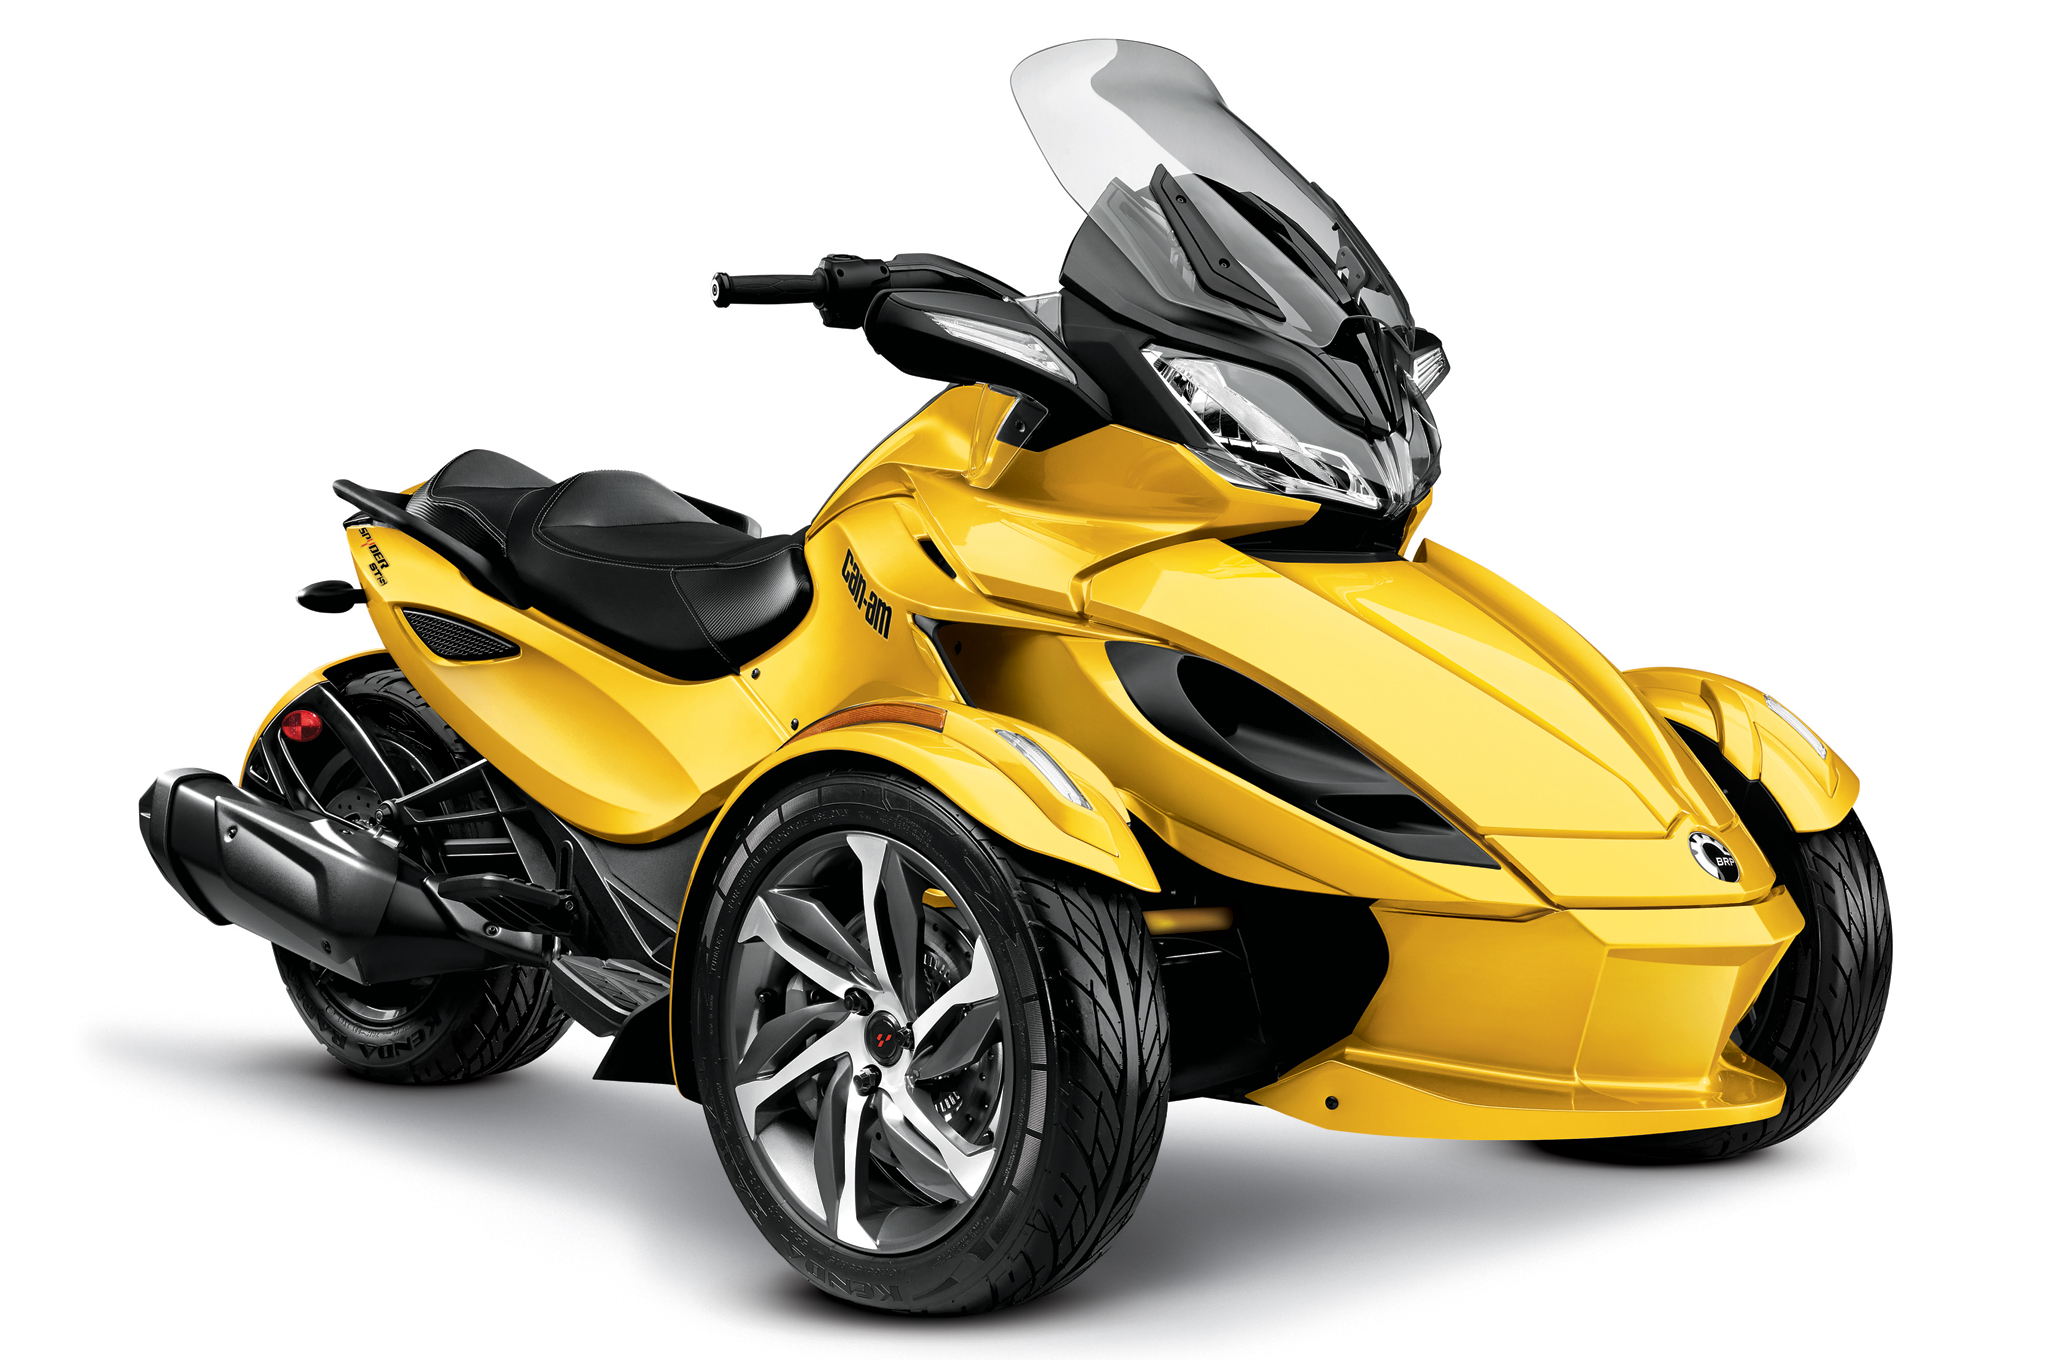 HQ Can-Am Spyder Wallpapers | File 991.34Kb